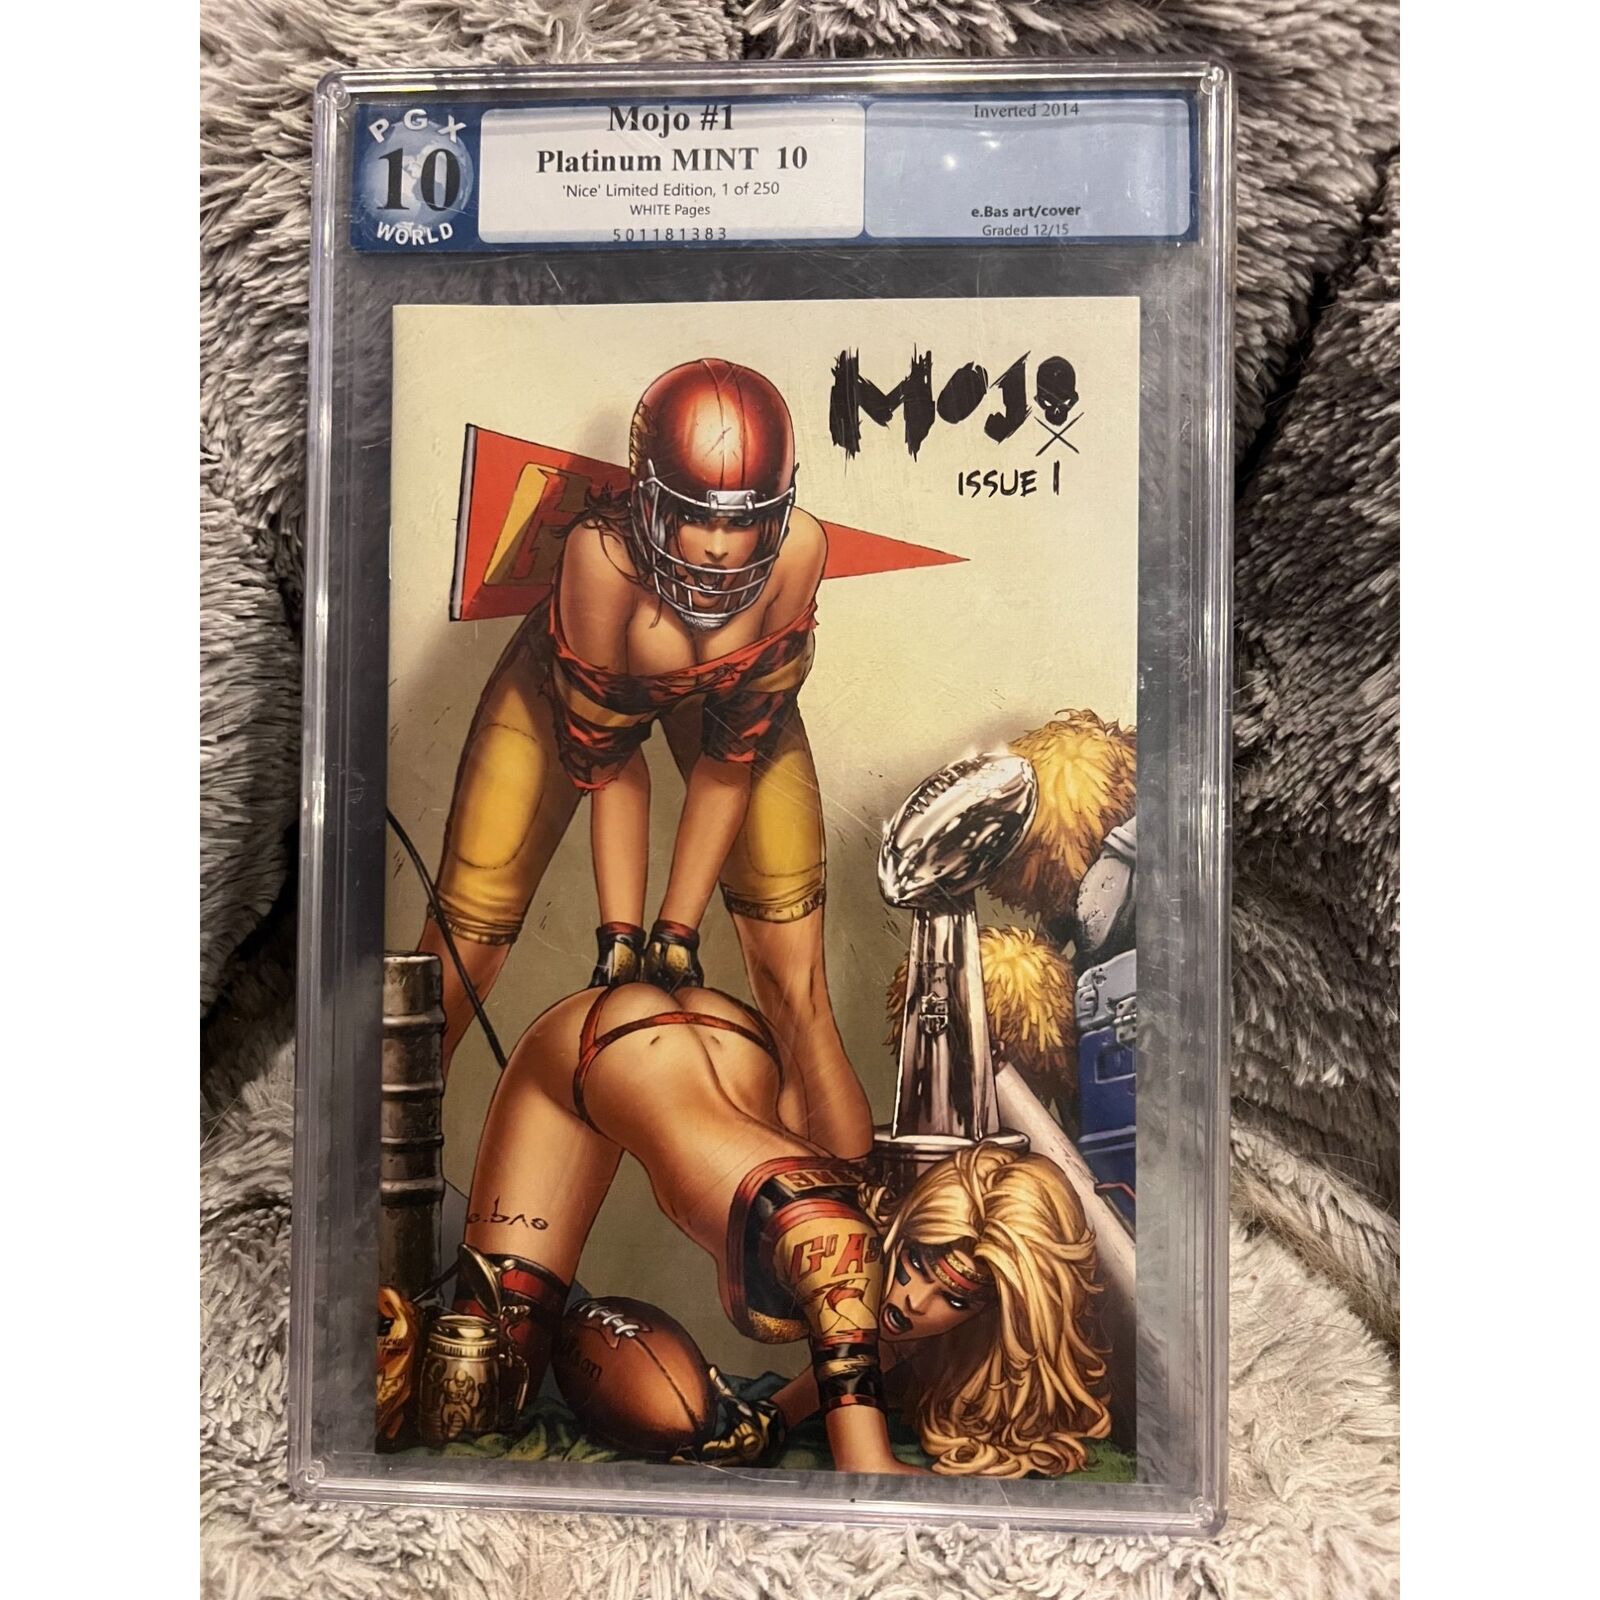 MOJO #1, GRADED PLATINUM MINT 10 by PGX. Art and cover by ebas. 